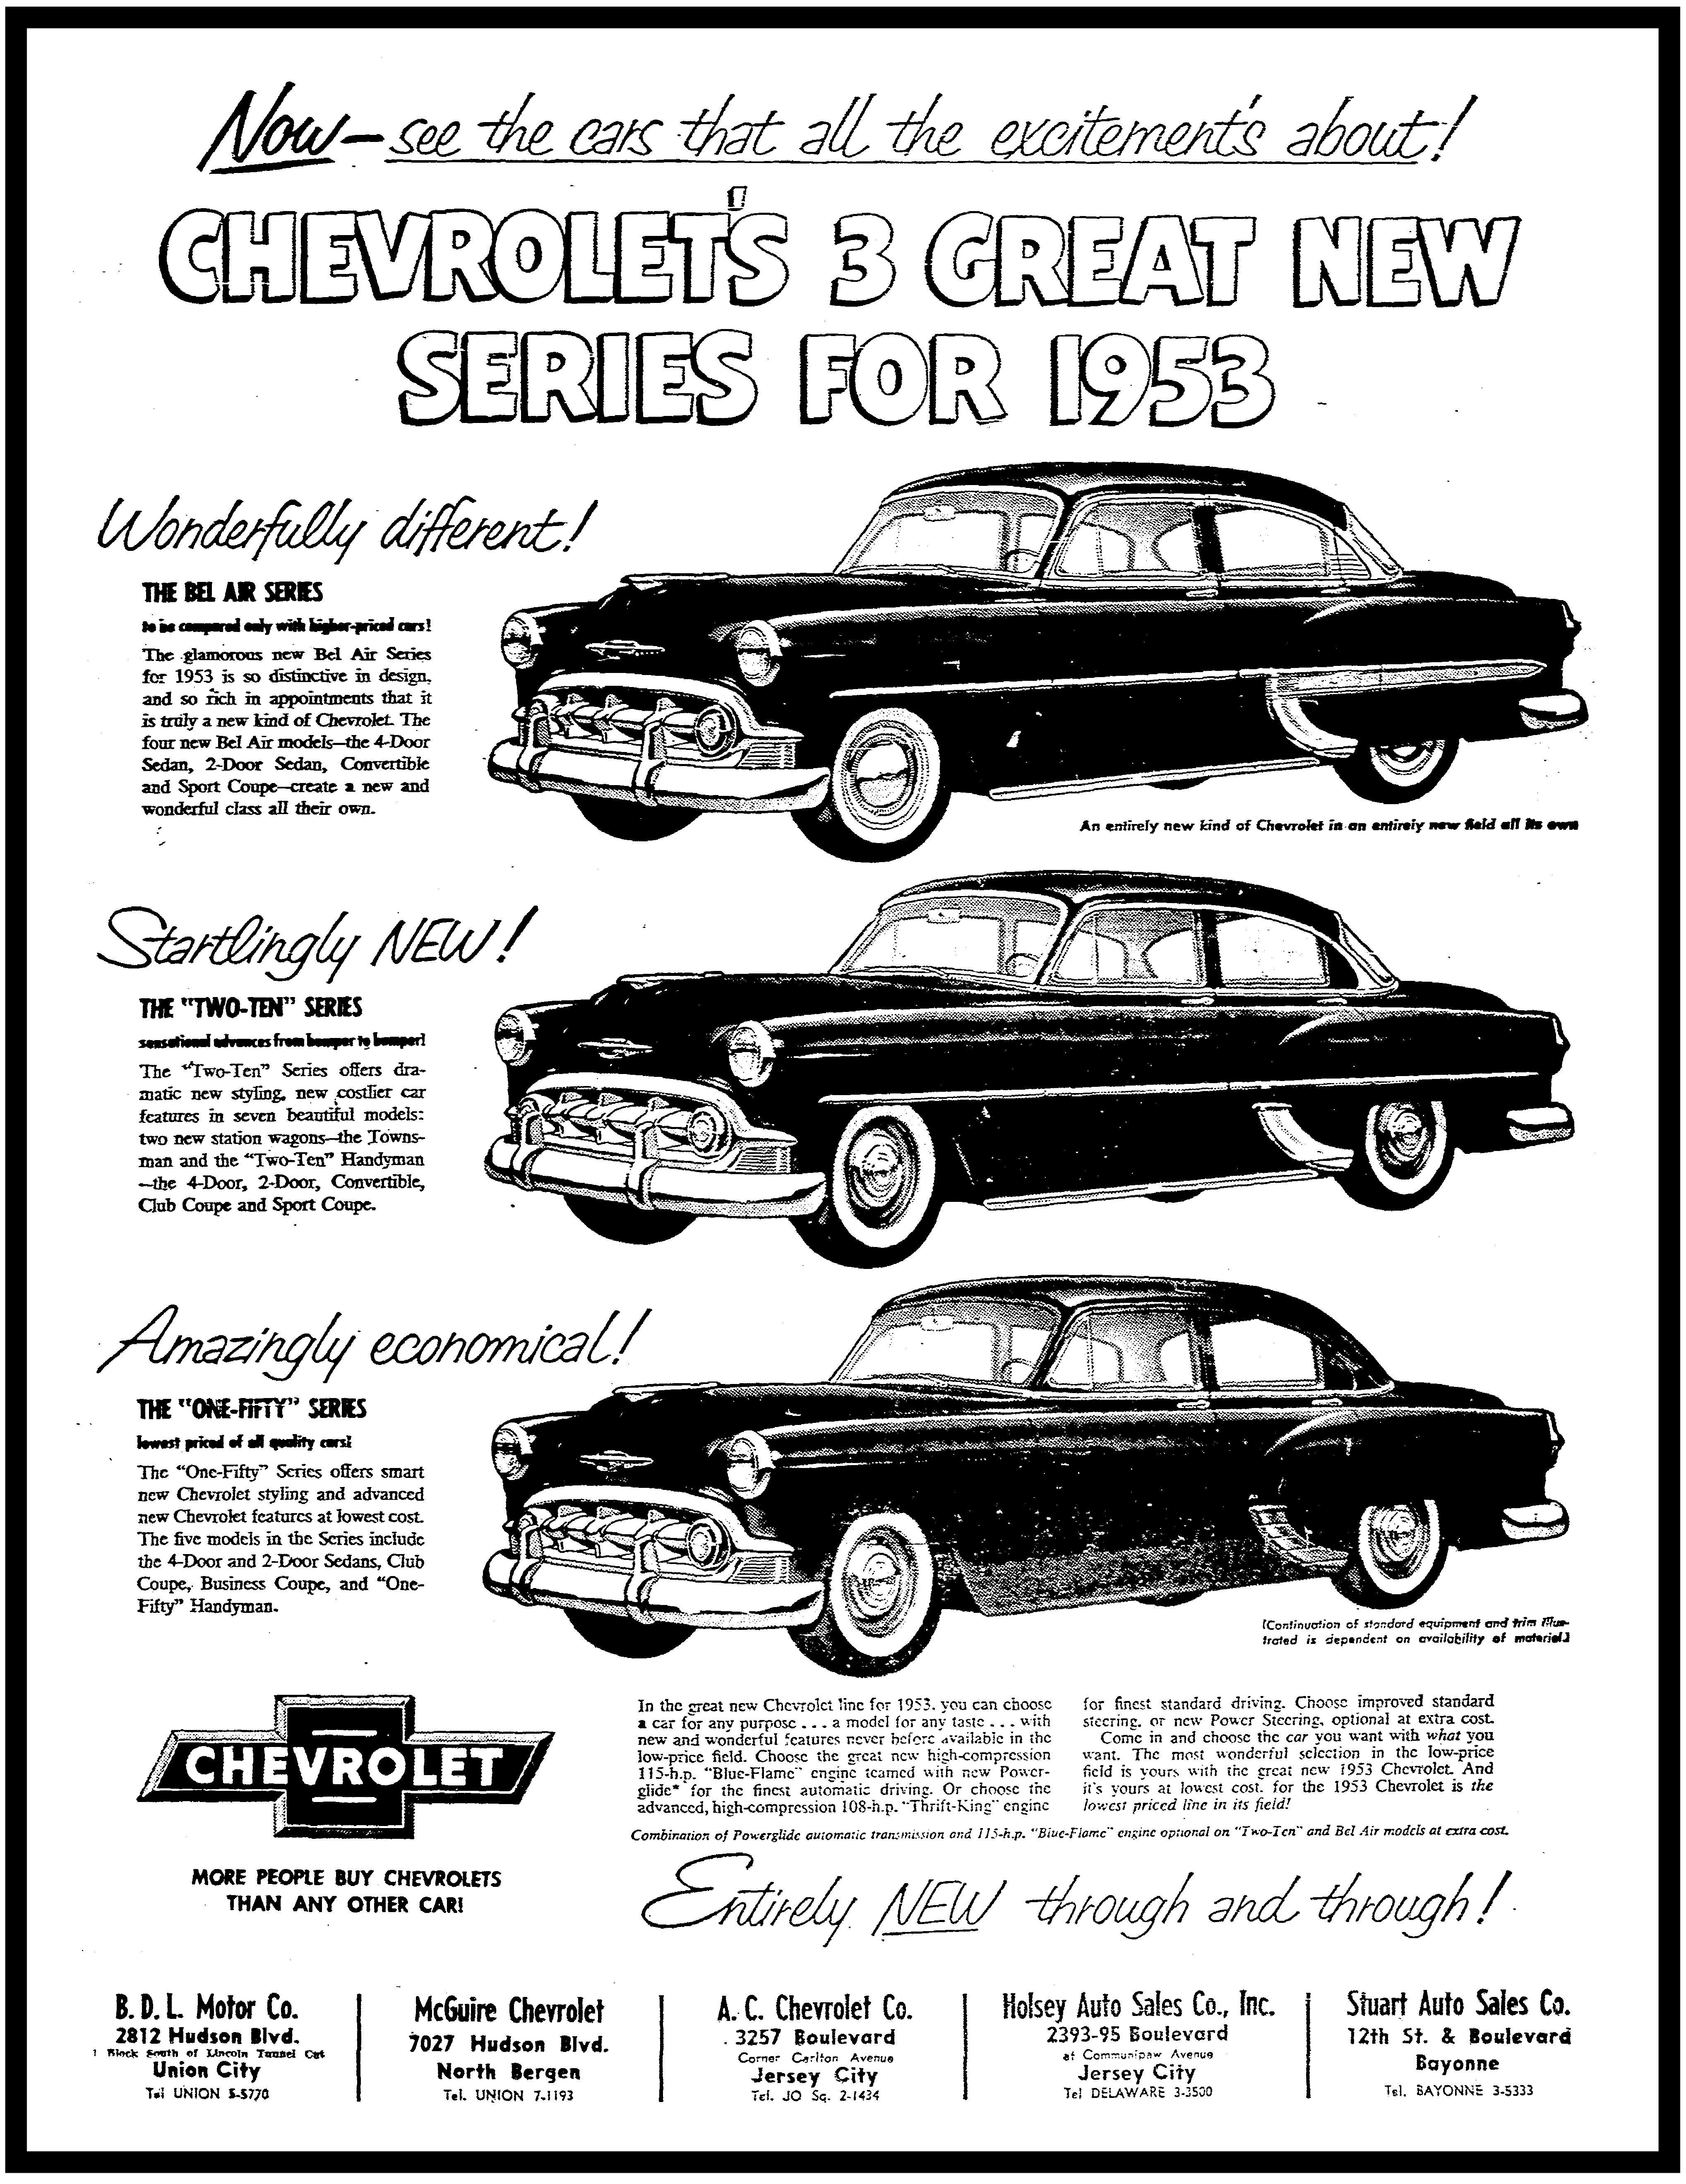 The Jersey Journal, Jan. 13, 1953: Before moving into his new, state-of-the-art, space-age Chevy automotive center at 3085 Kennedy Boulevard (then Hudson Boulevard), visionary auto dealer Lawrence Ambrosino (1904-1990) operated a Chevy showroom at Carlton Avenue and the Boulevard where he had been building an enviable reputation as a businessperson of integrity and community mindedness. At the end of 1953, Ambrosino moved into his instantly iconic Chevy emporium in Journal Square near commercial districts and major highway systems where, over the decades, the car-buying experience in Hudson County became transformative and memorable. -- John Gomez